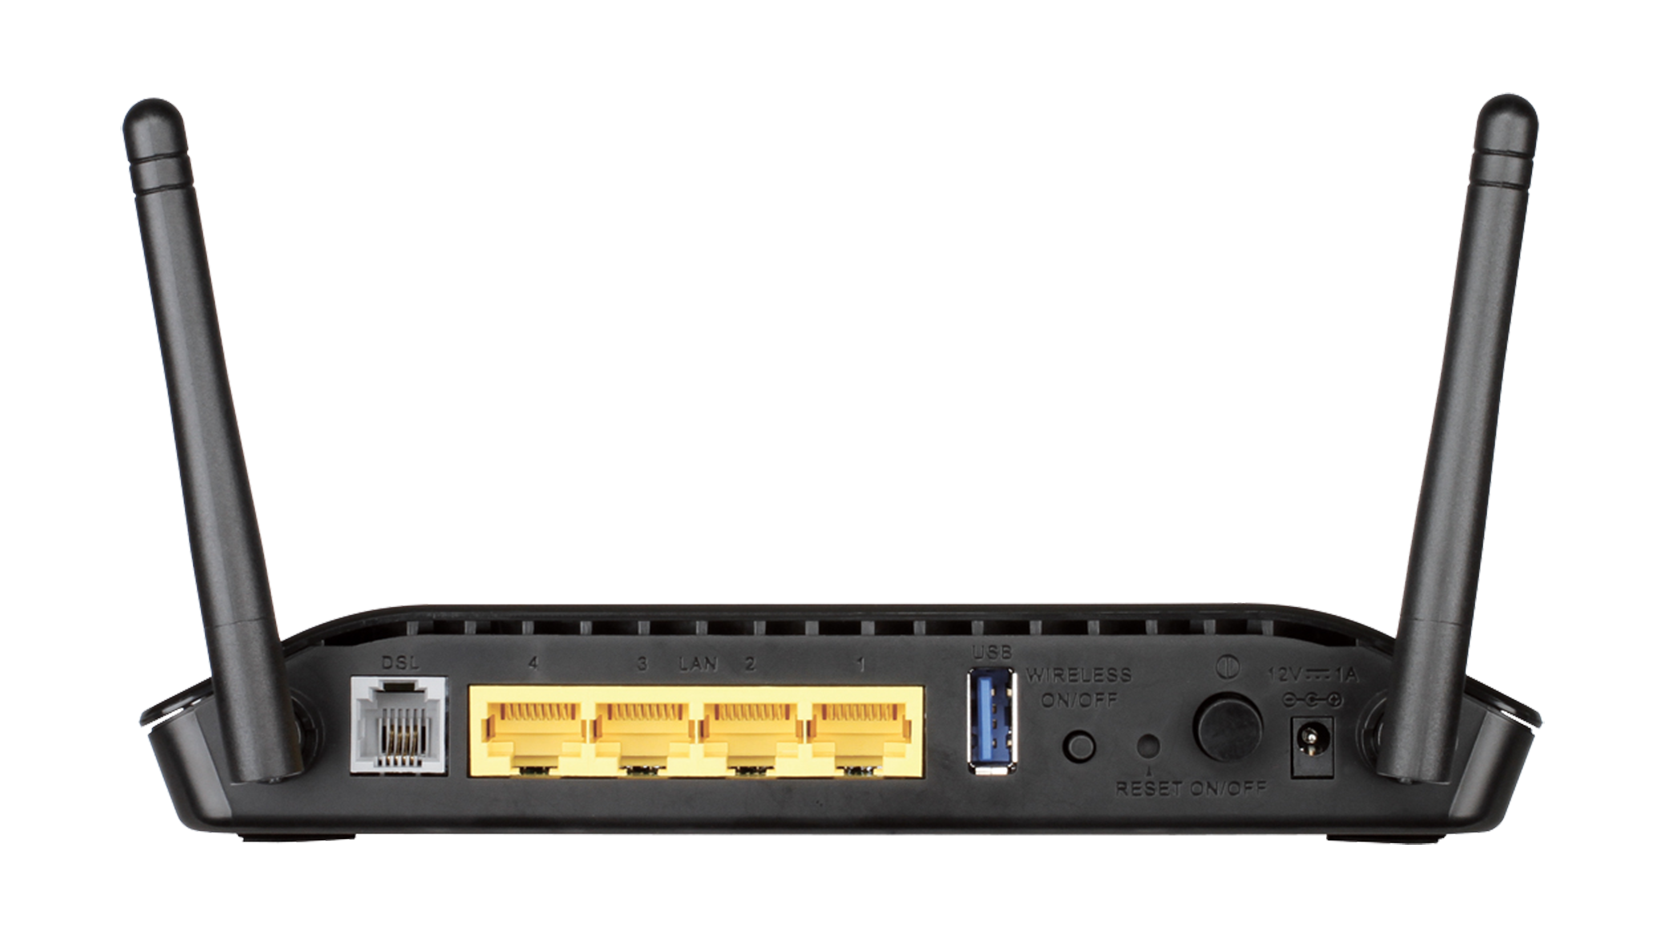  A black and yellow D-Link brand modem/router with label indicating where to connect the power supply, the DSL line, LAN cables, and a USB cable. The image represents the search query 'WiFi router and modem updates to improve internet connectivity for Facebook's Star Feature'.